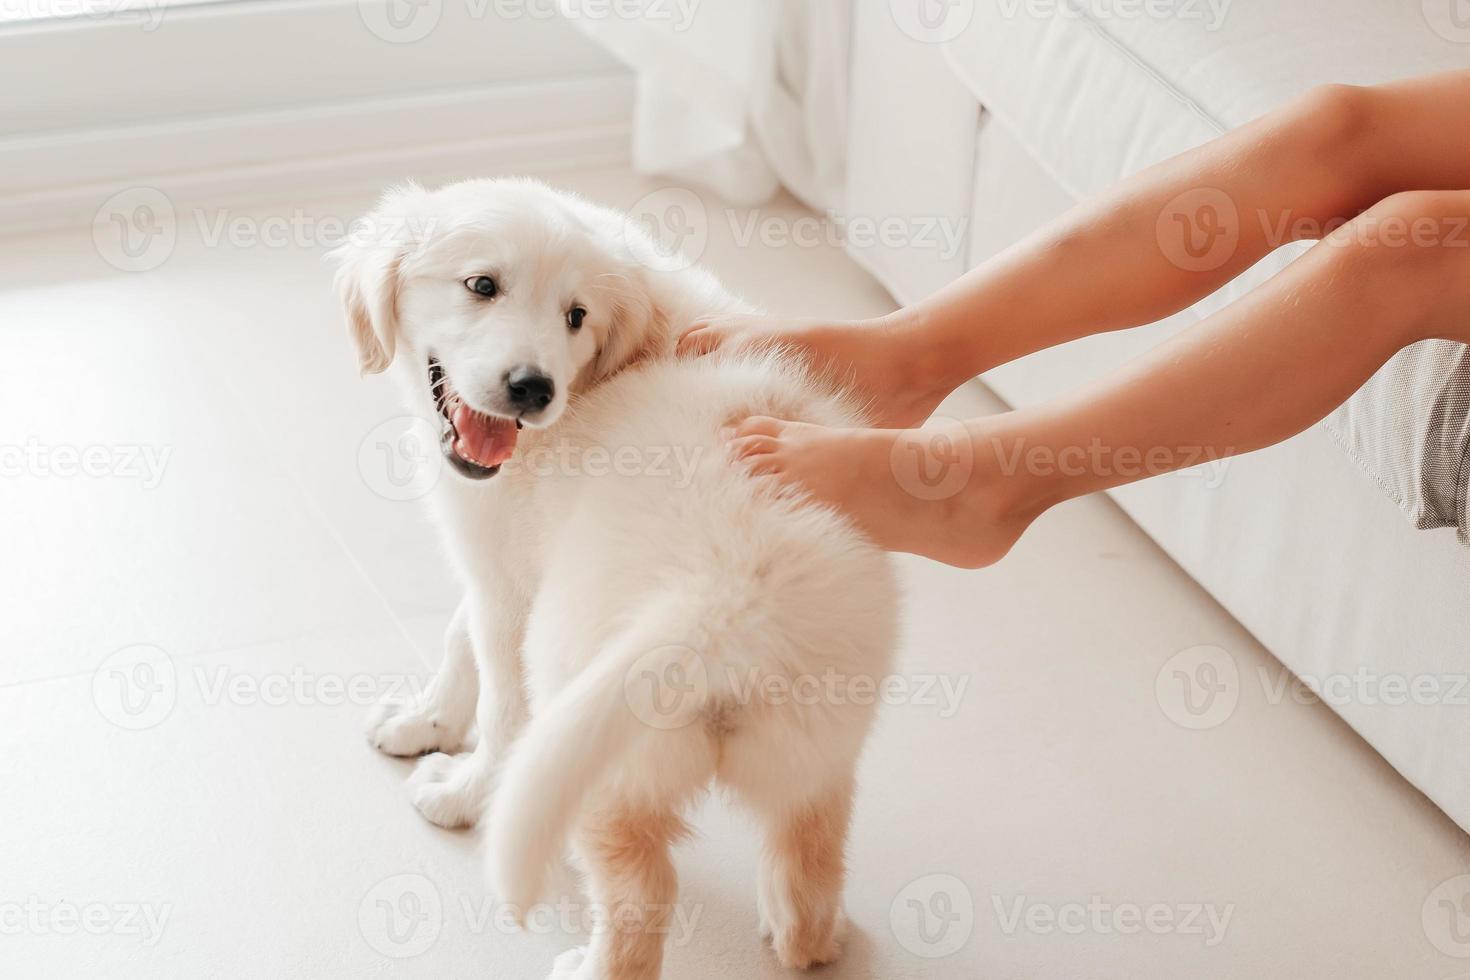 puppy pet dog Golden Retriever on floor at home and kids bare feet white beige natural pastel colores ceramic or porcelain clean floor tile child play children friend kid warm feet photo